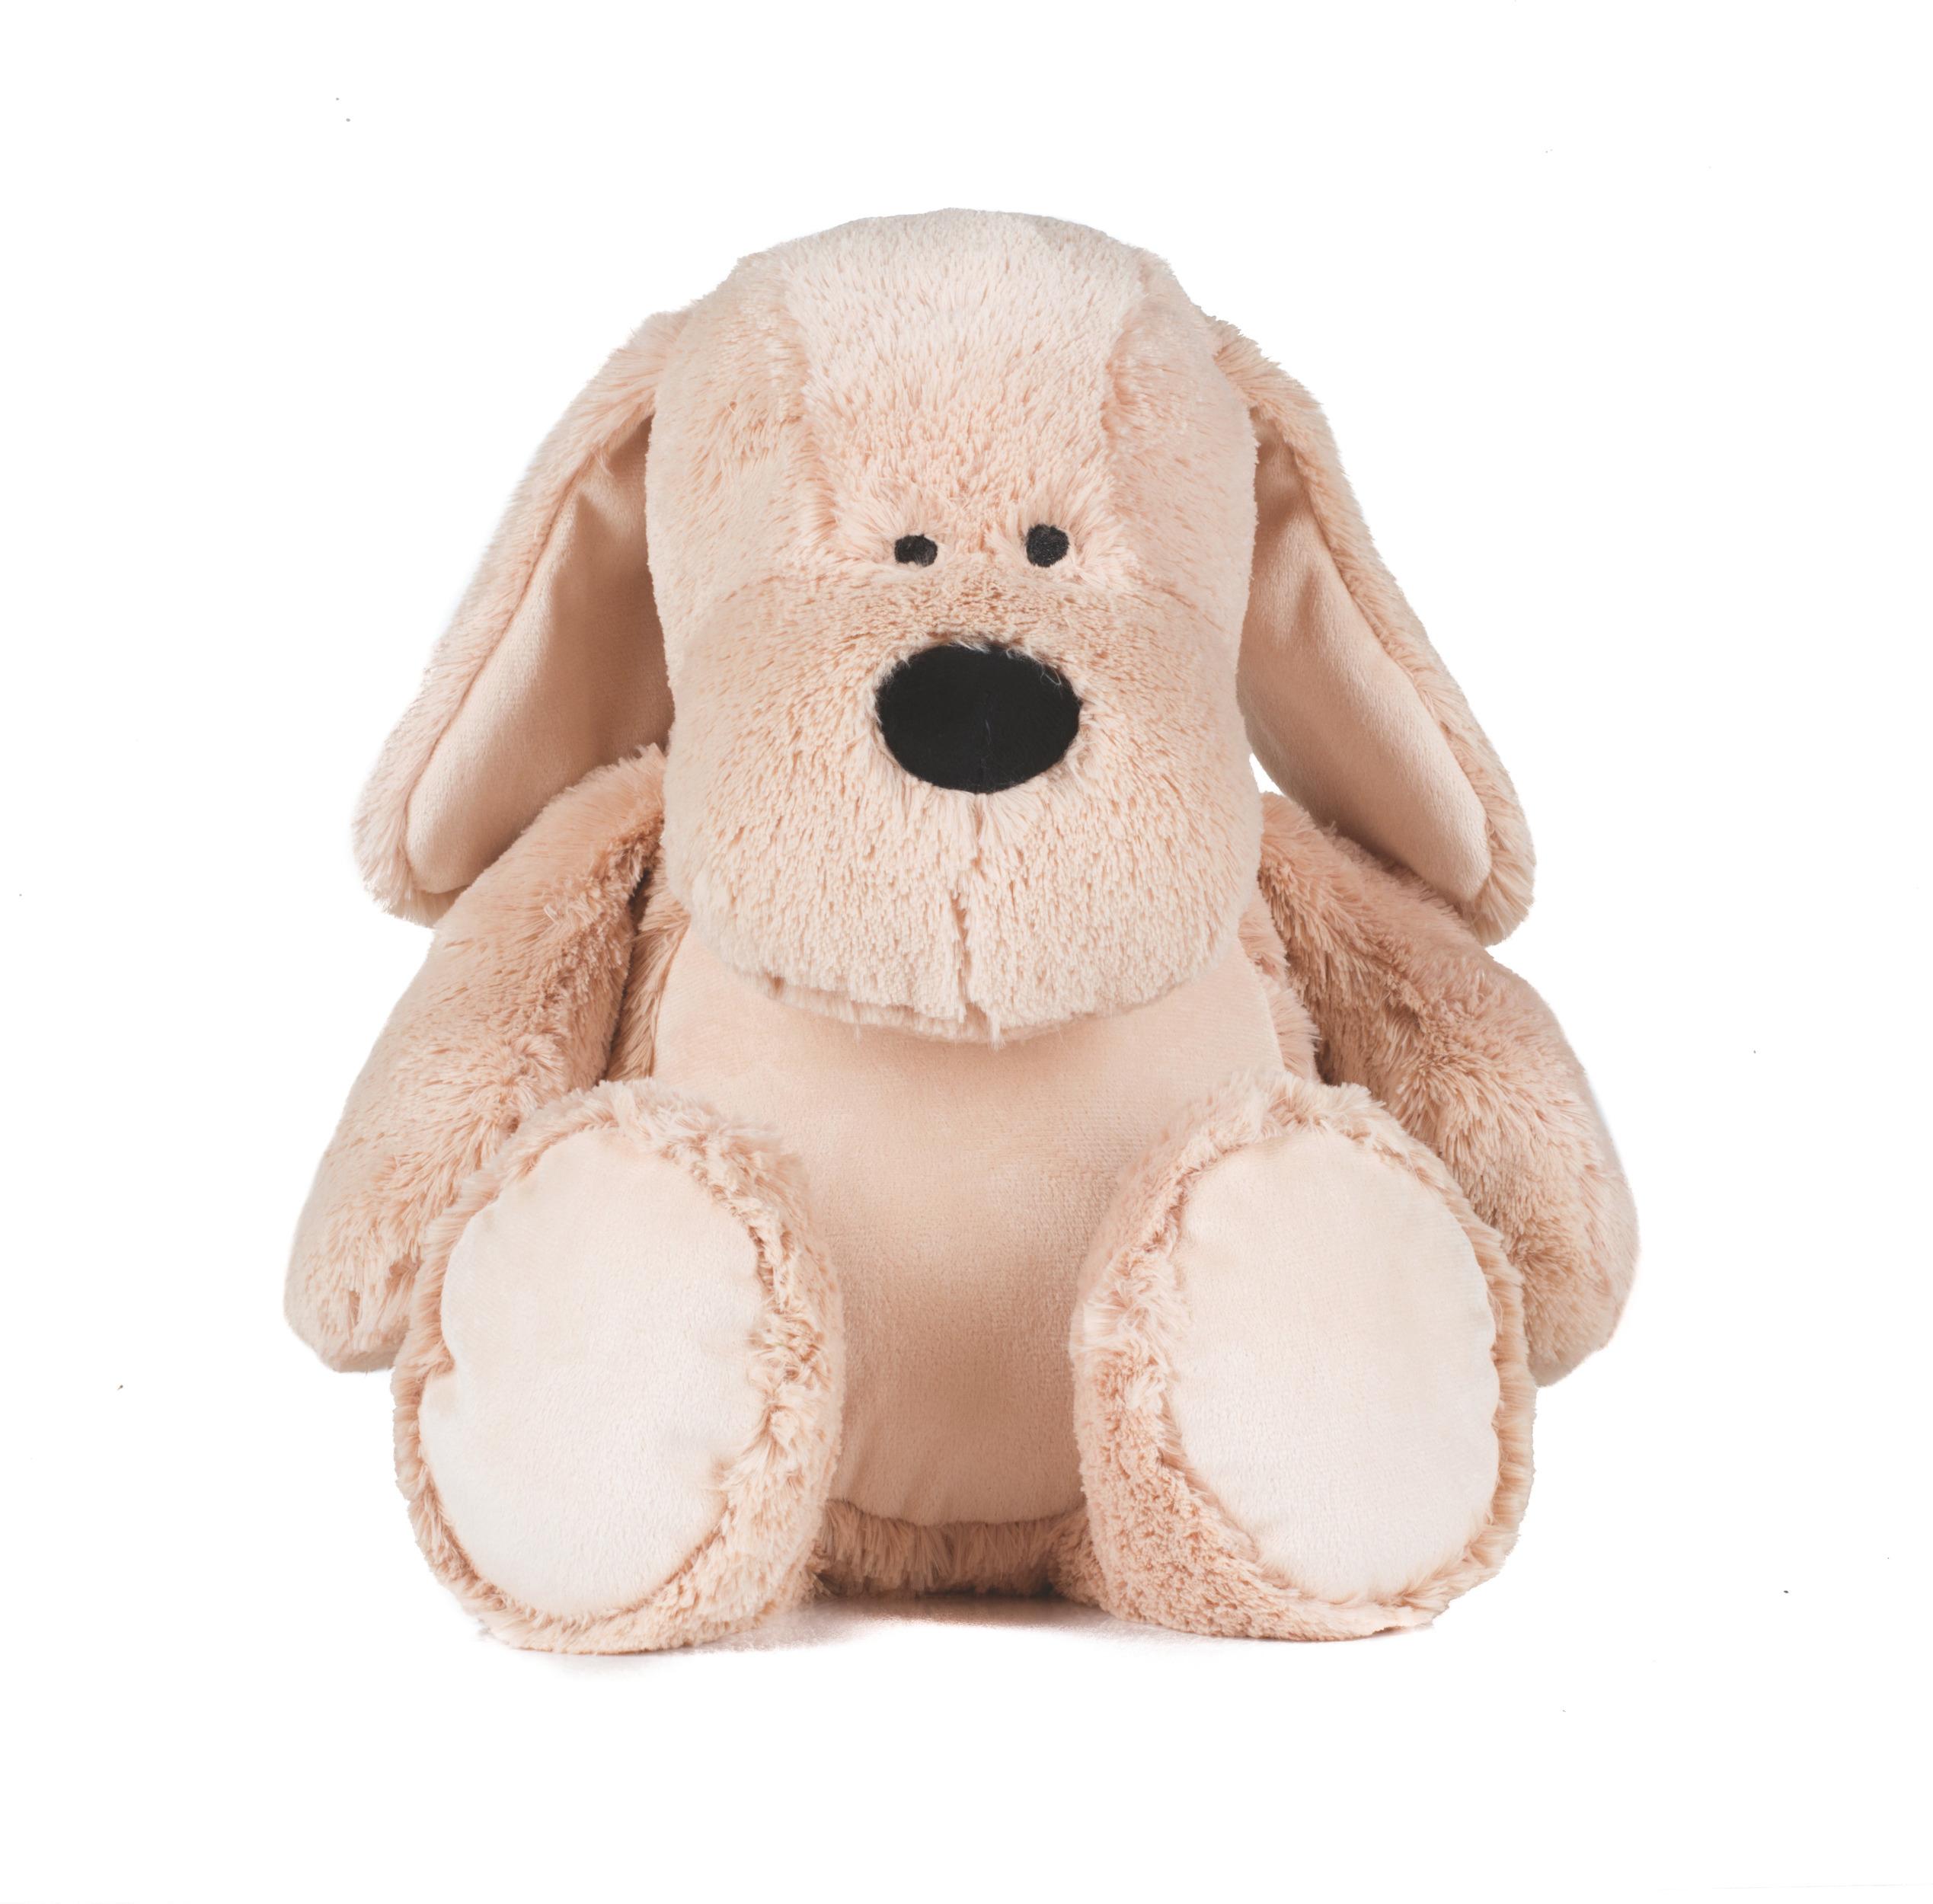 Embroidered Dog Plush - The Super Cute Puppy! 